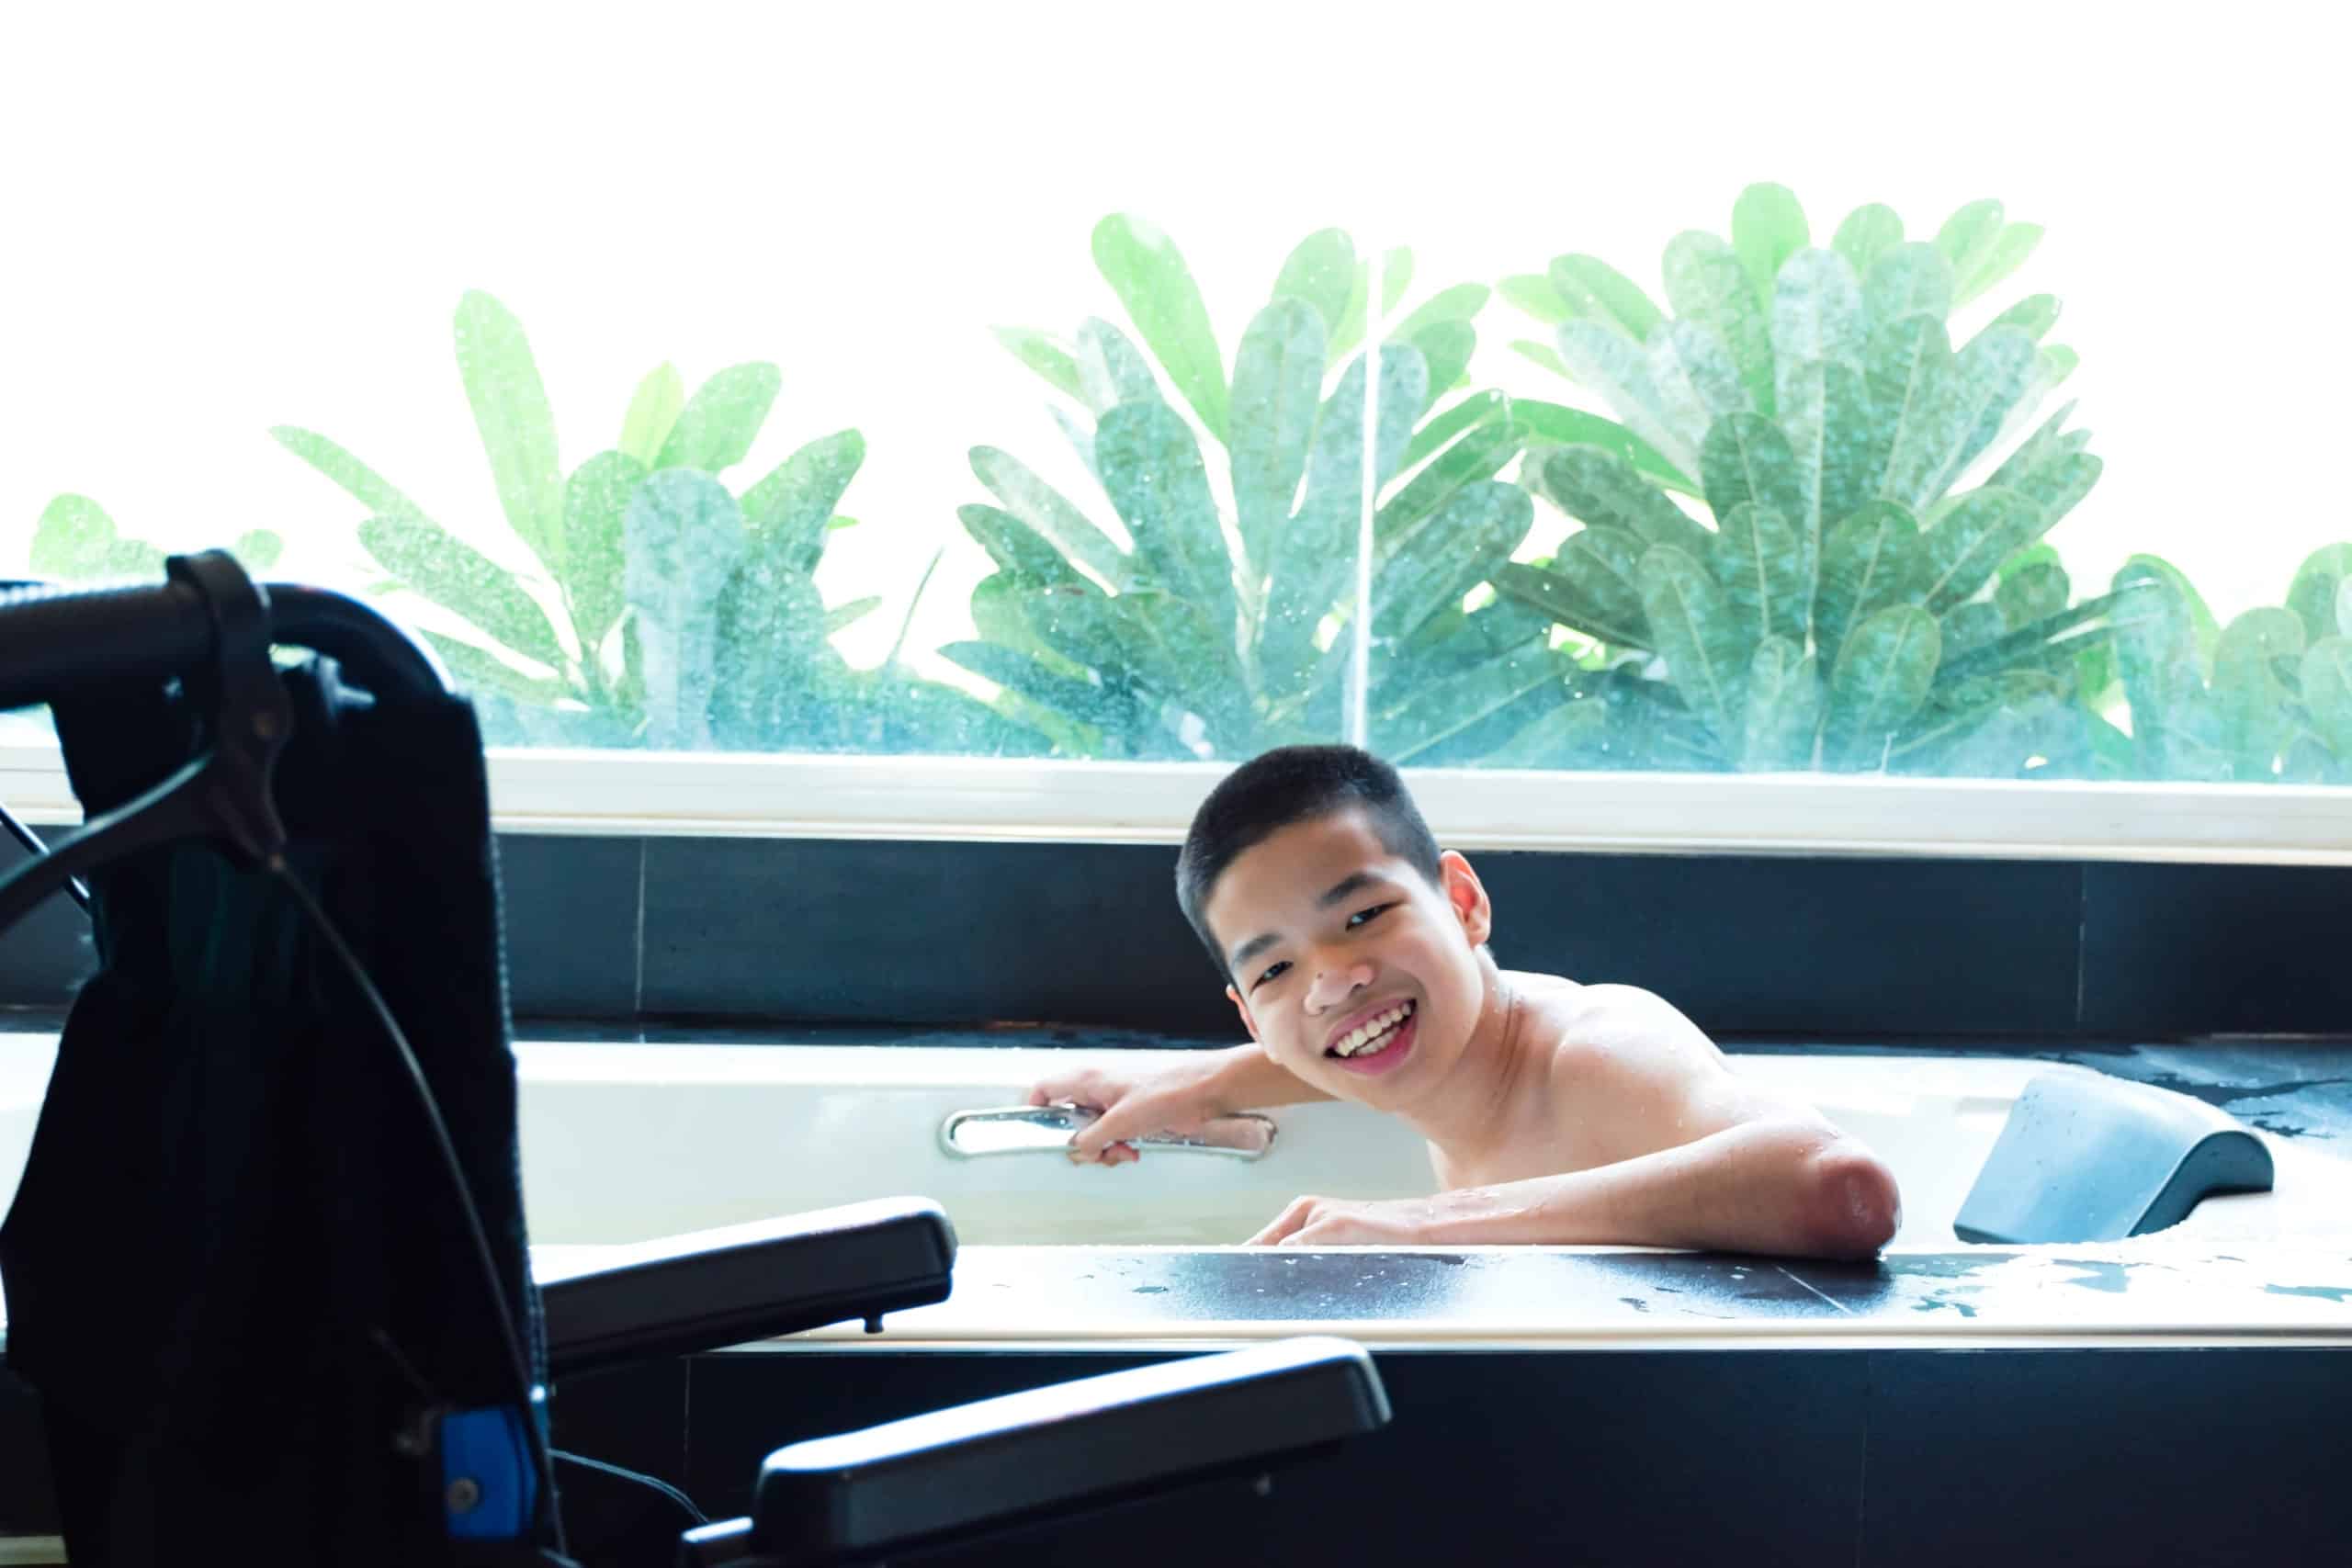 A smiling young man takes a bath at a spa with his wheelchair close by.